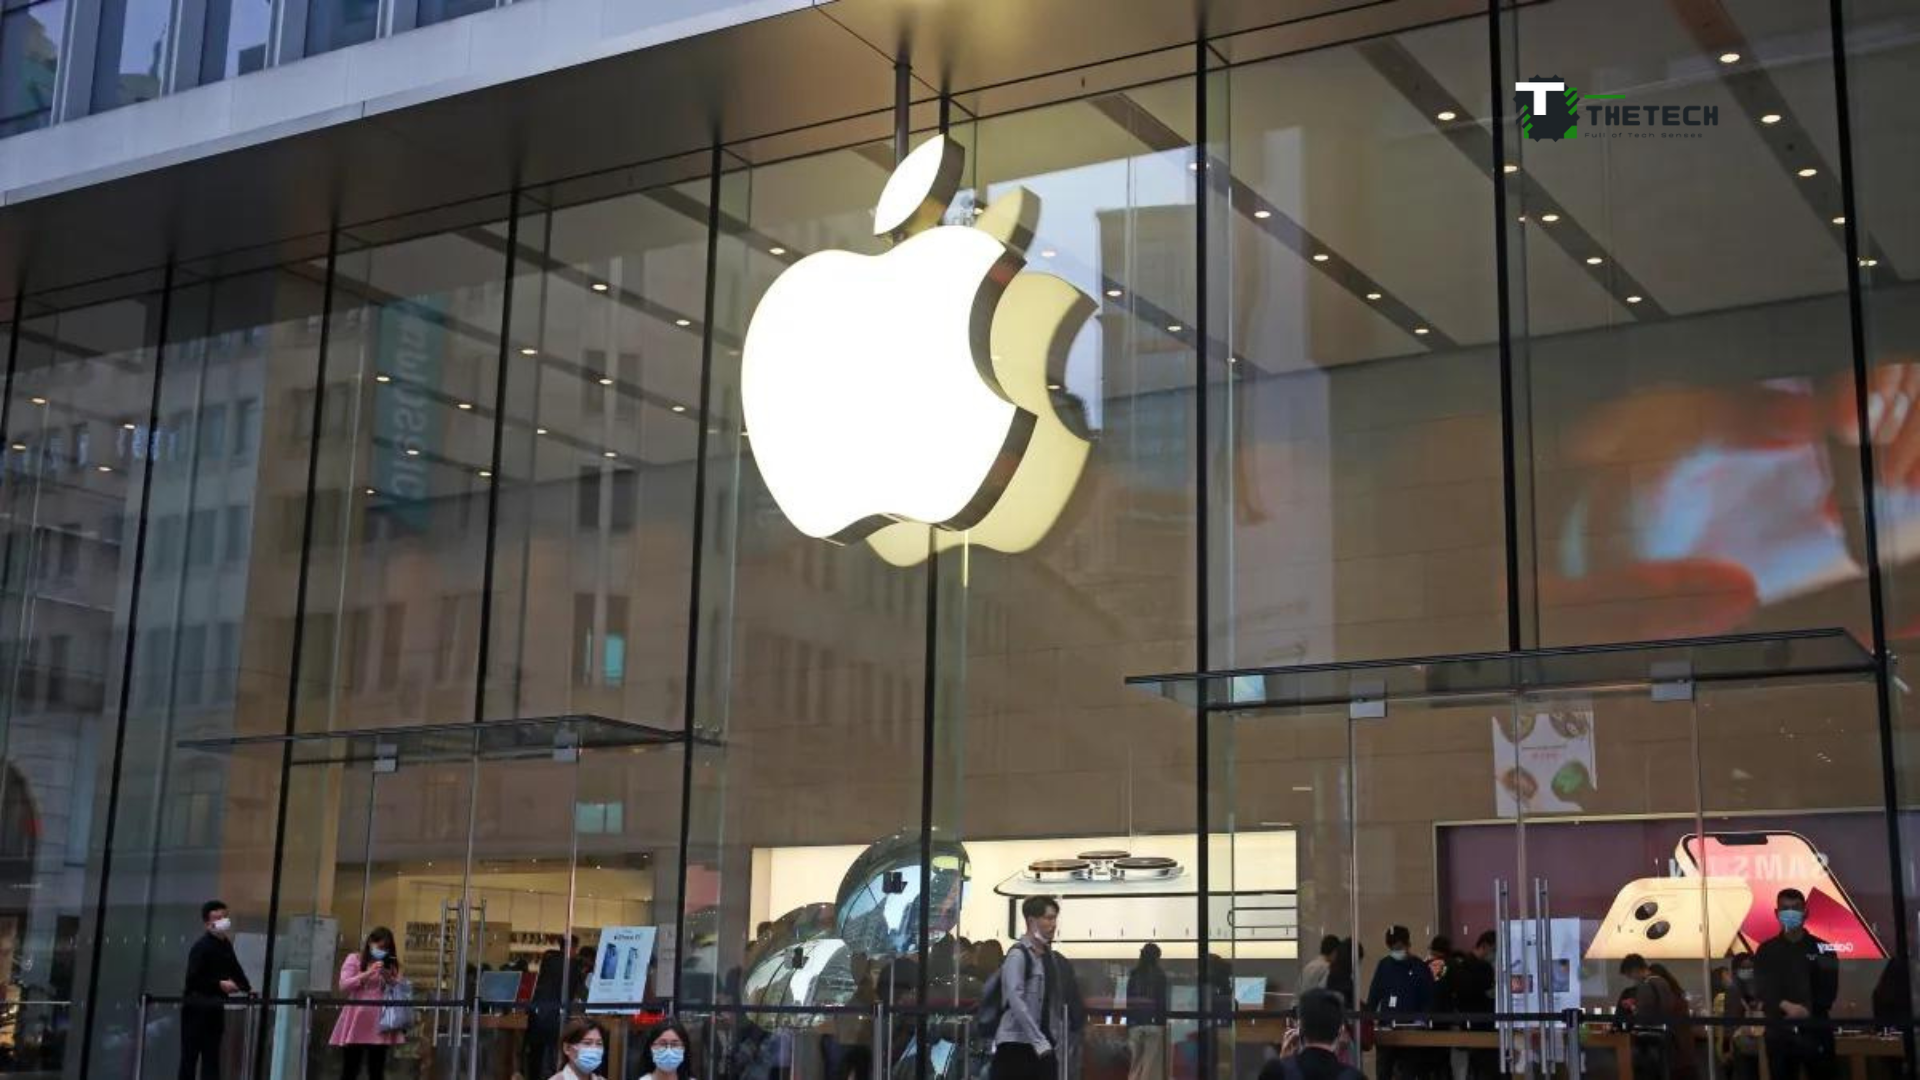 Apple has endorsed a California Senate bill that would require large companies to report their greenhouse gas emissions every year.